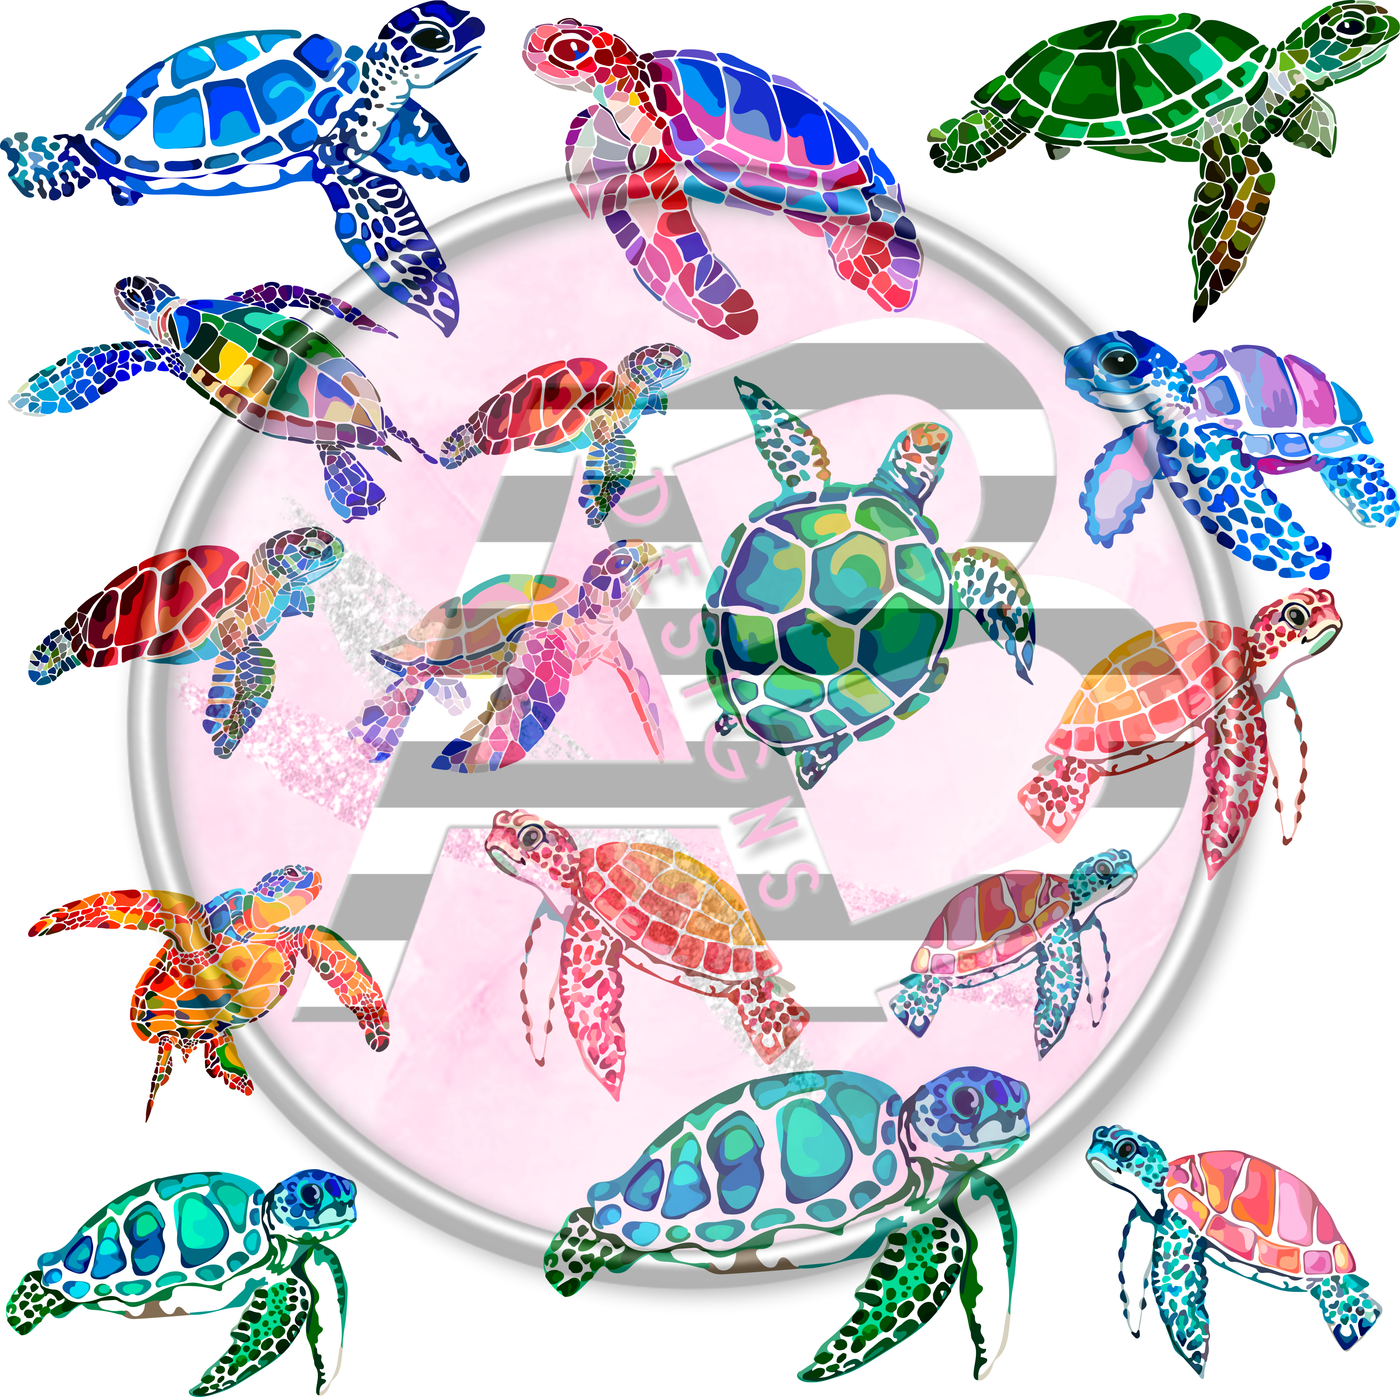 Turtle 01 Full Sheet 12x12 Clear Cast Decal